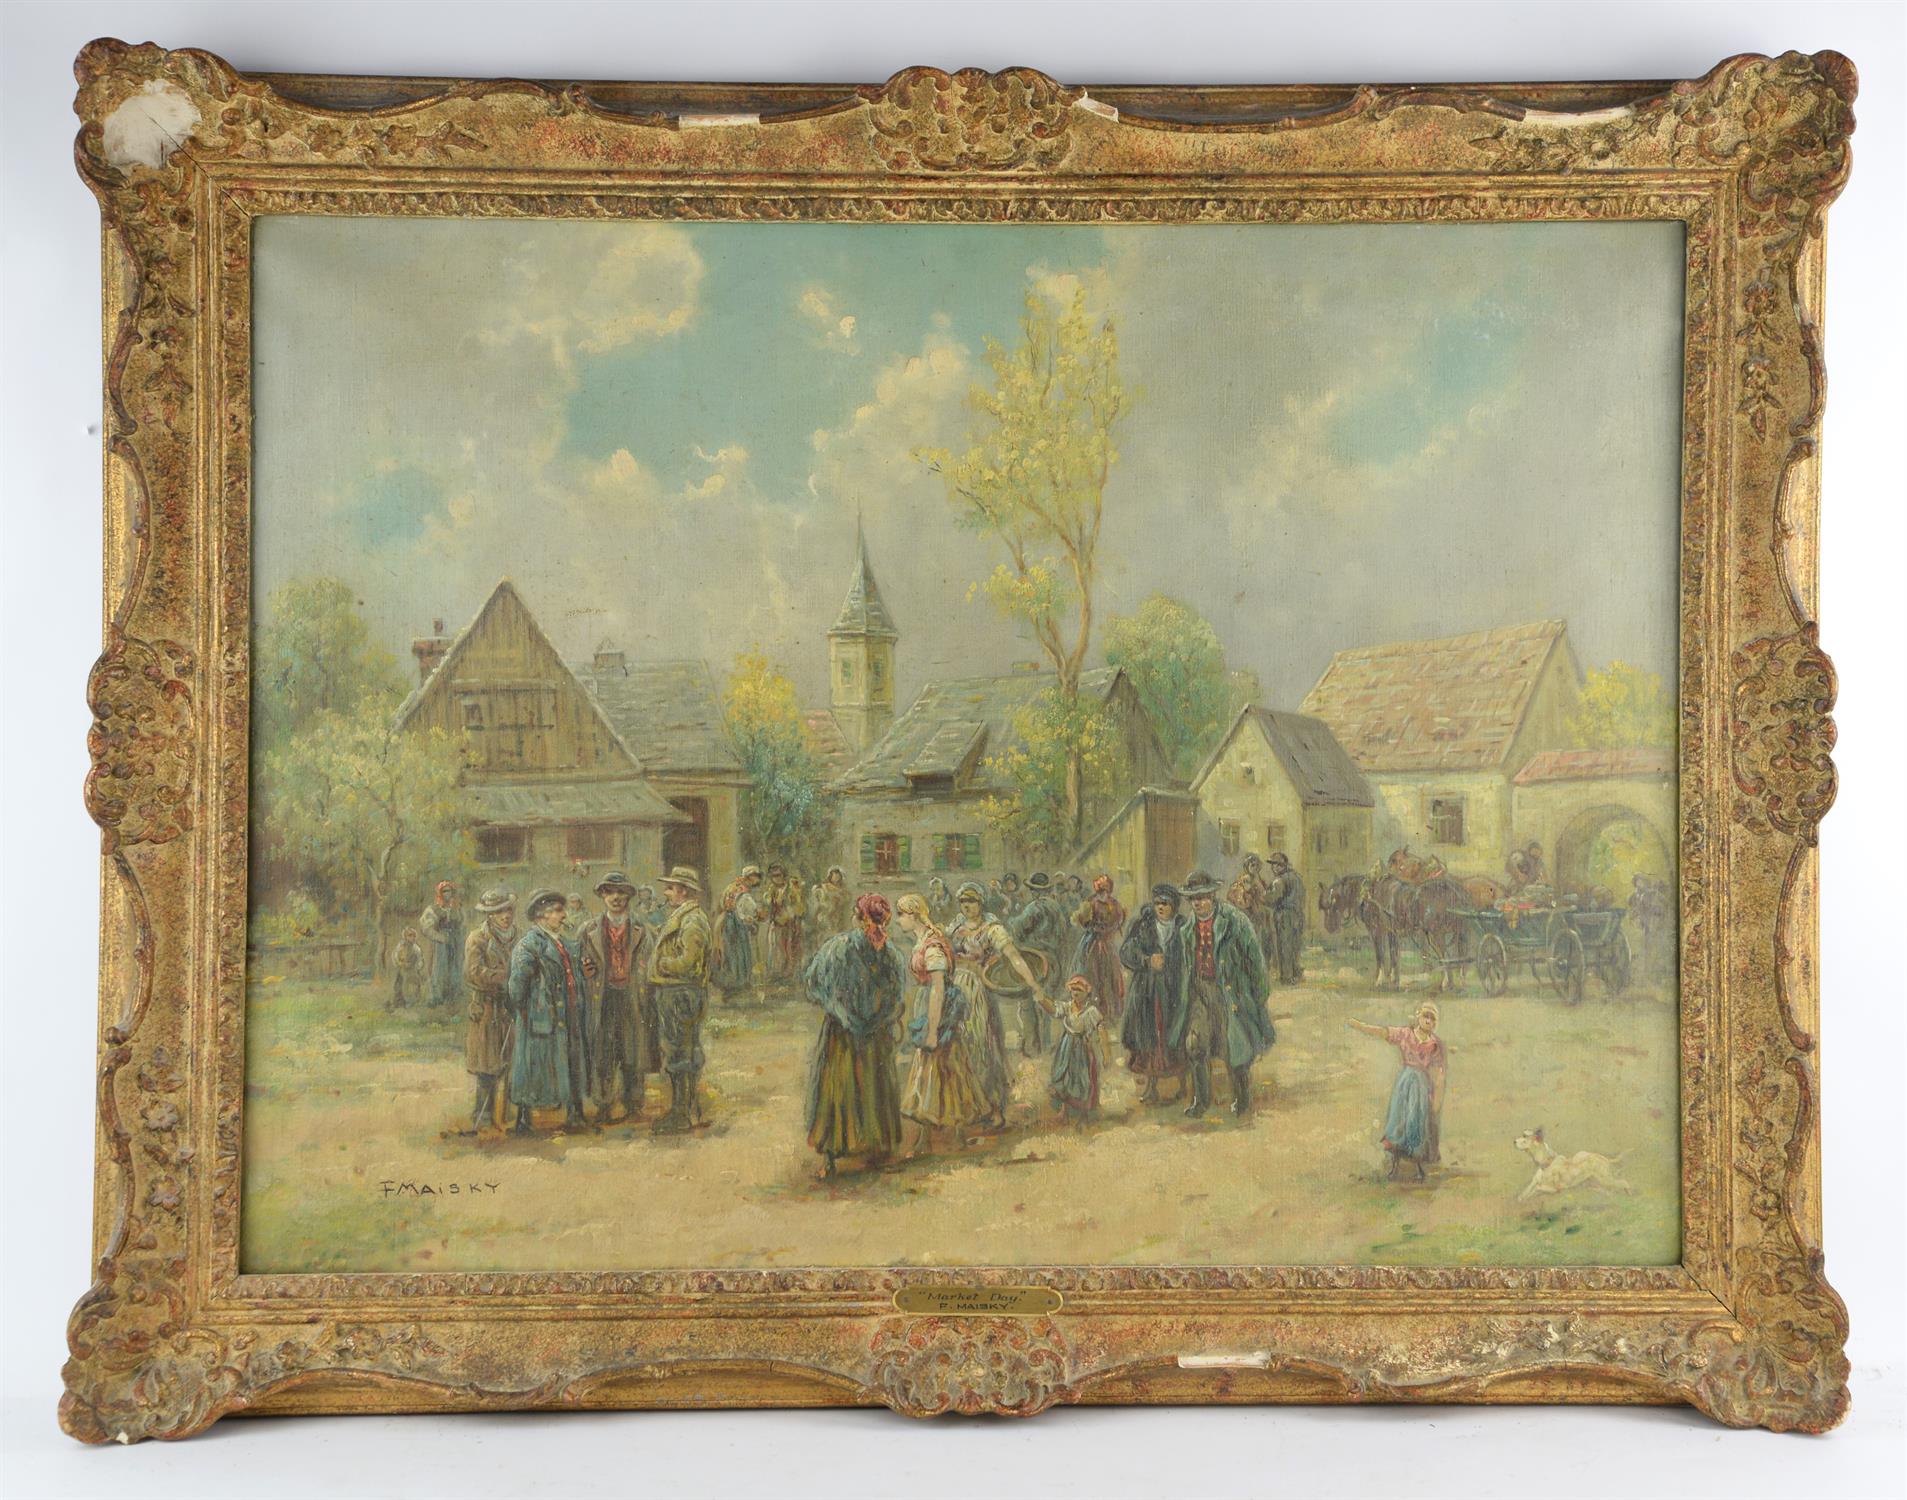 F. Maisky (20th century), Market Day, Figures in a town square, oil on canvas, signed lower left,